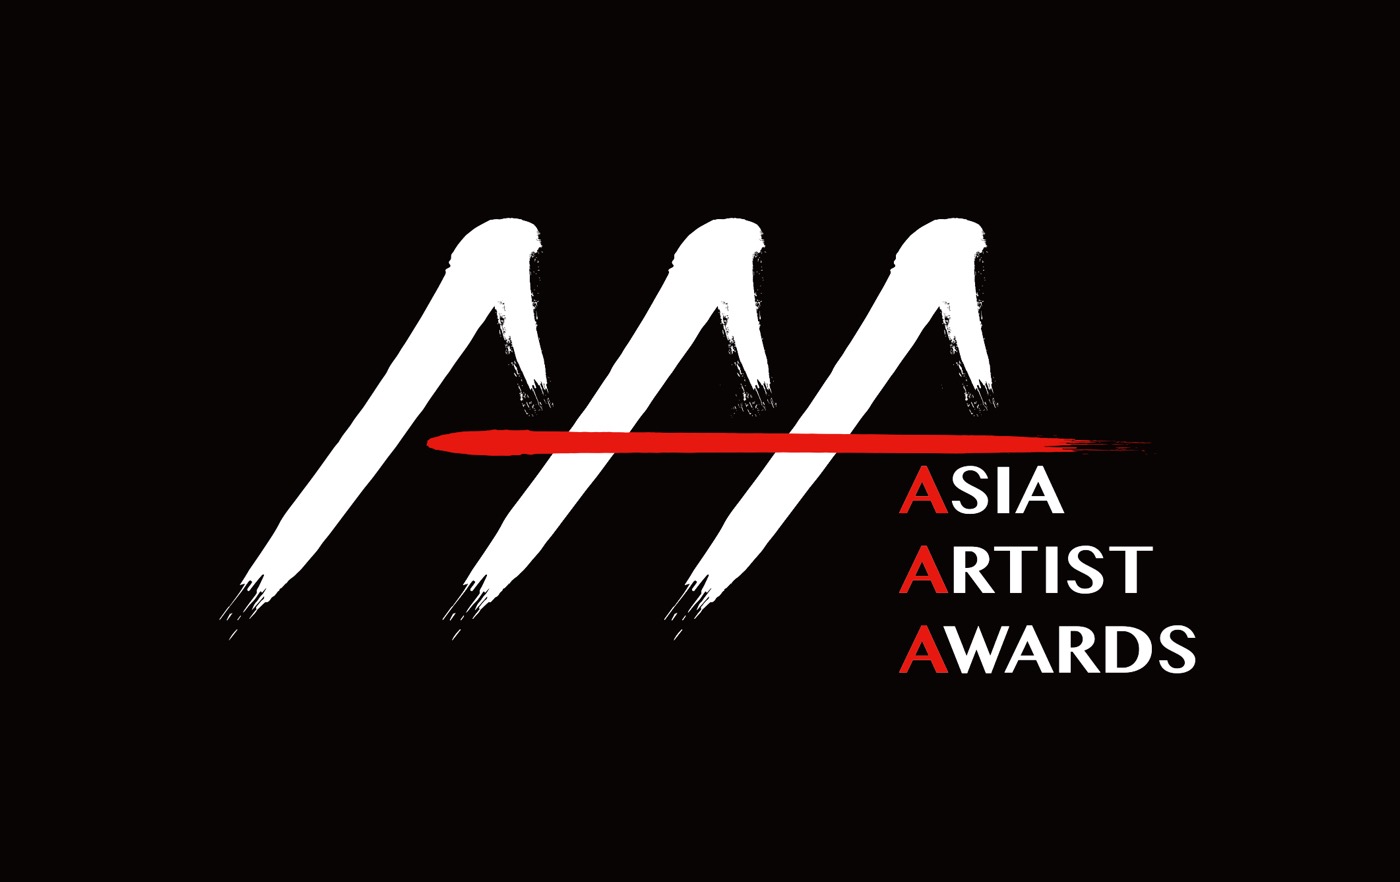 ＆TEAM（読み：エンティーム）ら『Asia Artist Awards in Japan』出演決定 - 画像一覧（3/5）